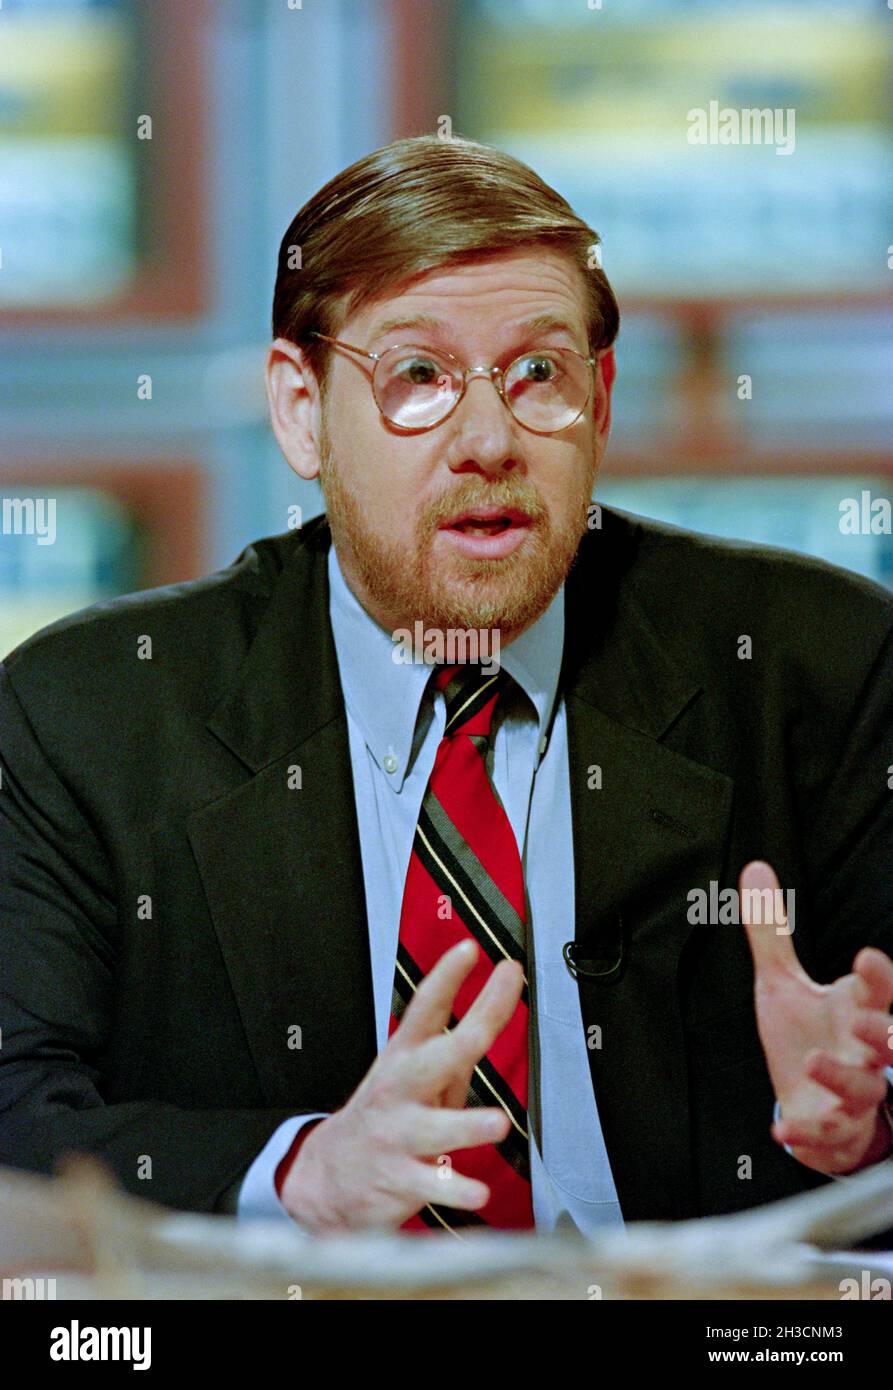 Former U.S. Food and Drug Administration commissioner Dr. David Kessler discusses the tobacco settlement during NBC's Meet the Press television show June 22, 1997 in Washington, D.C. Stock Photo